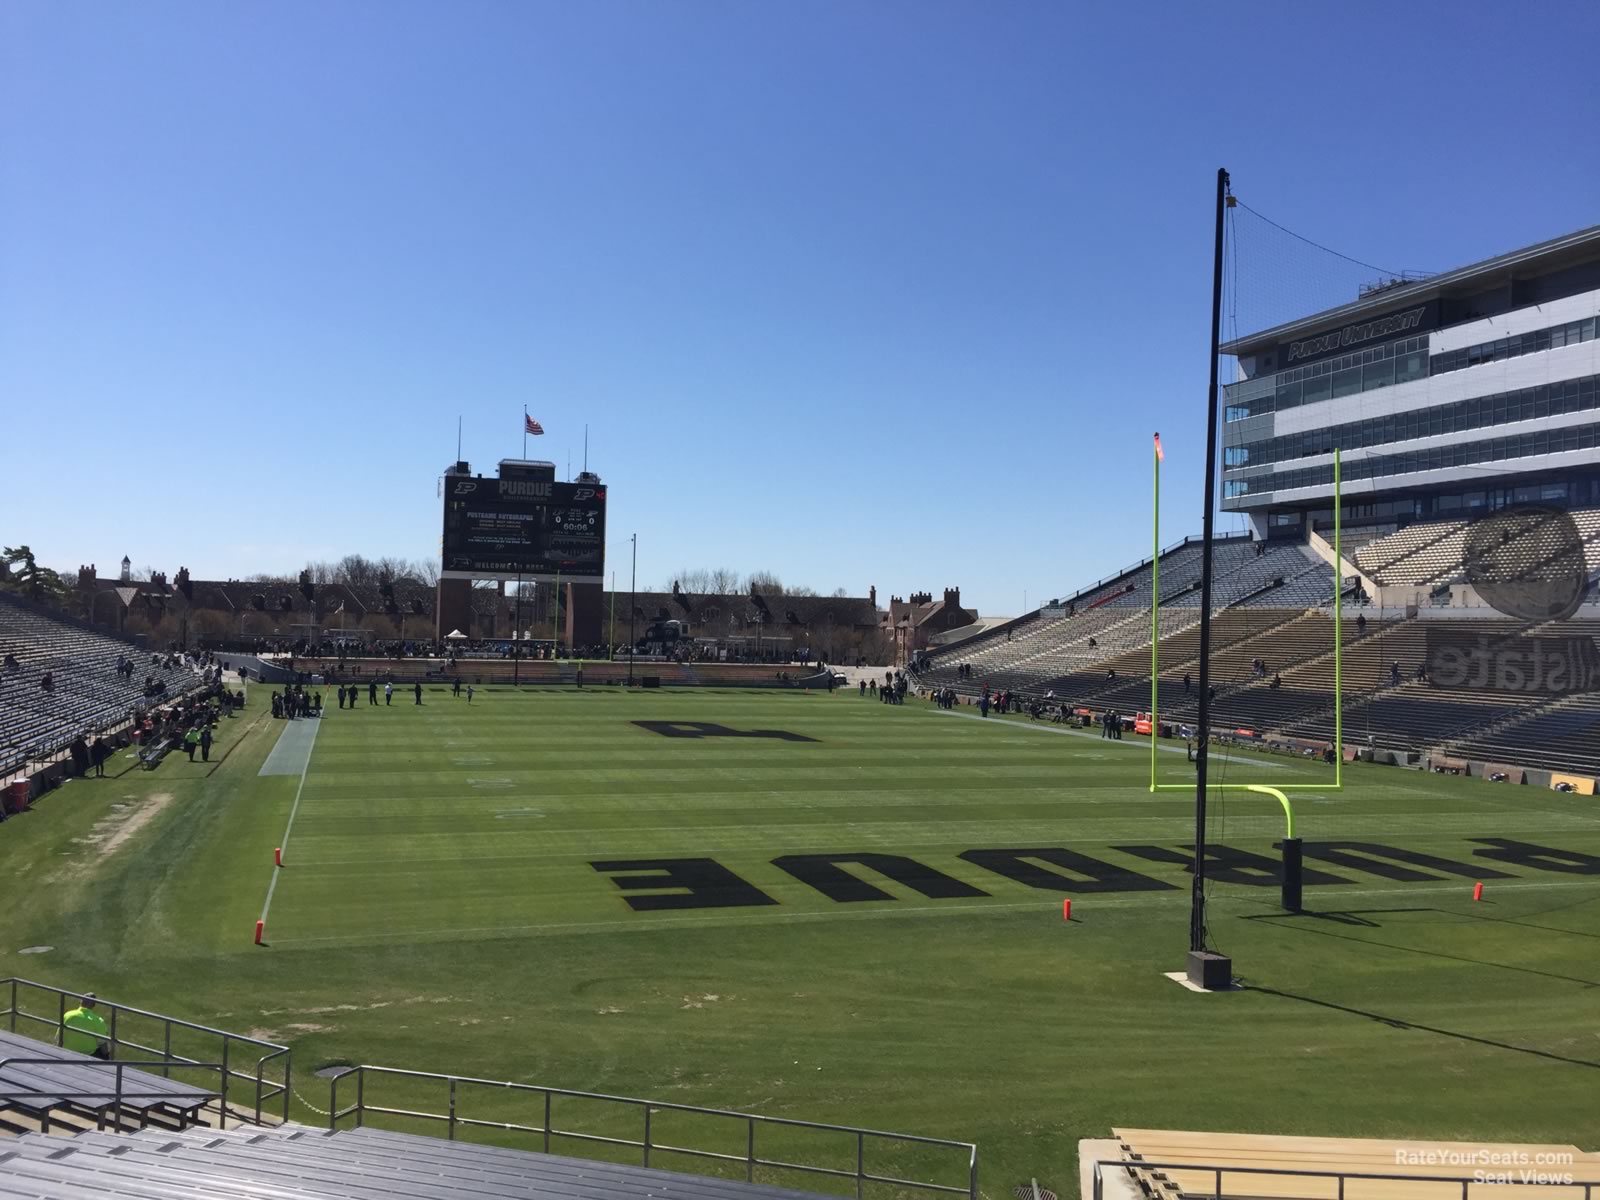 section 113, row 24 seat view  - ross-ade stadium